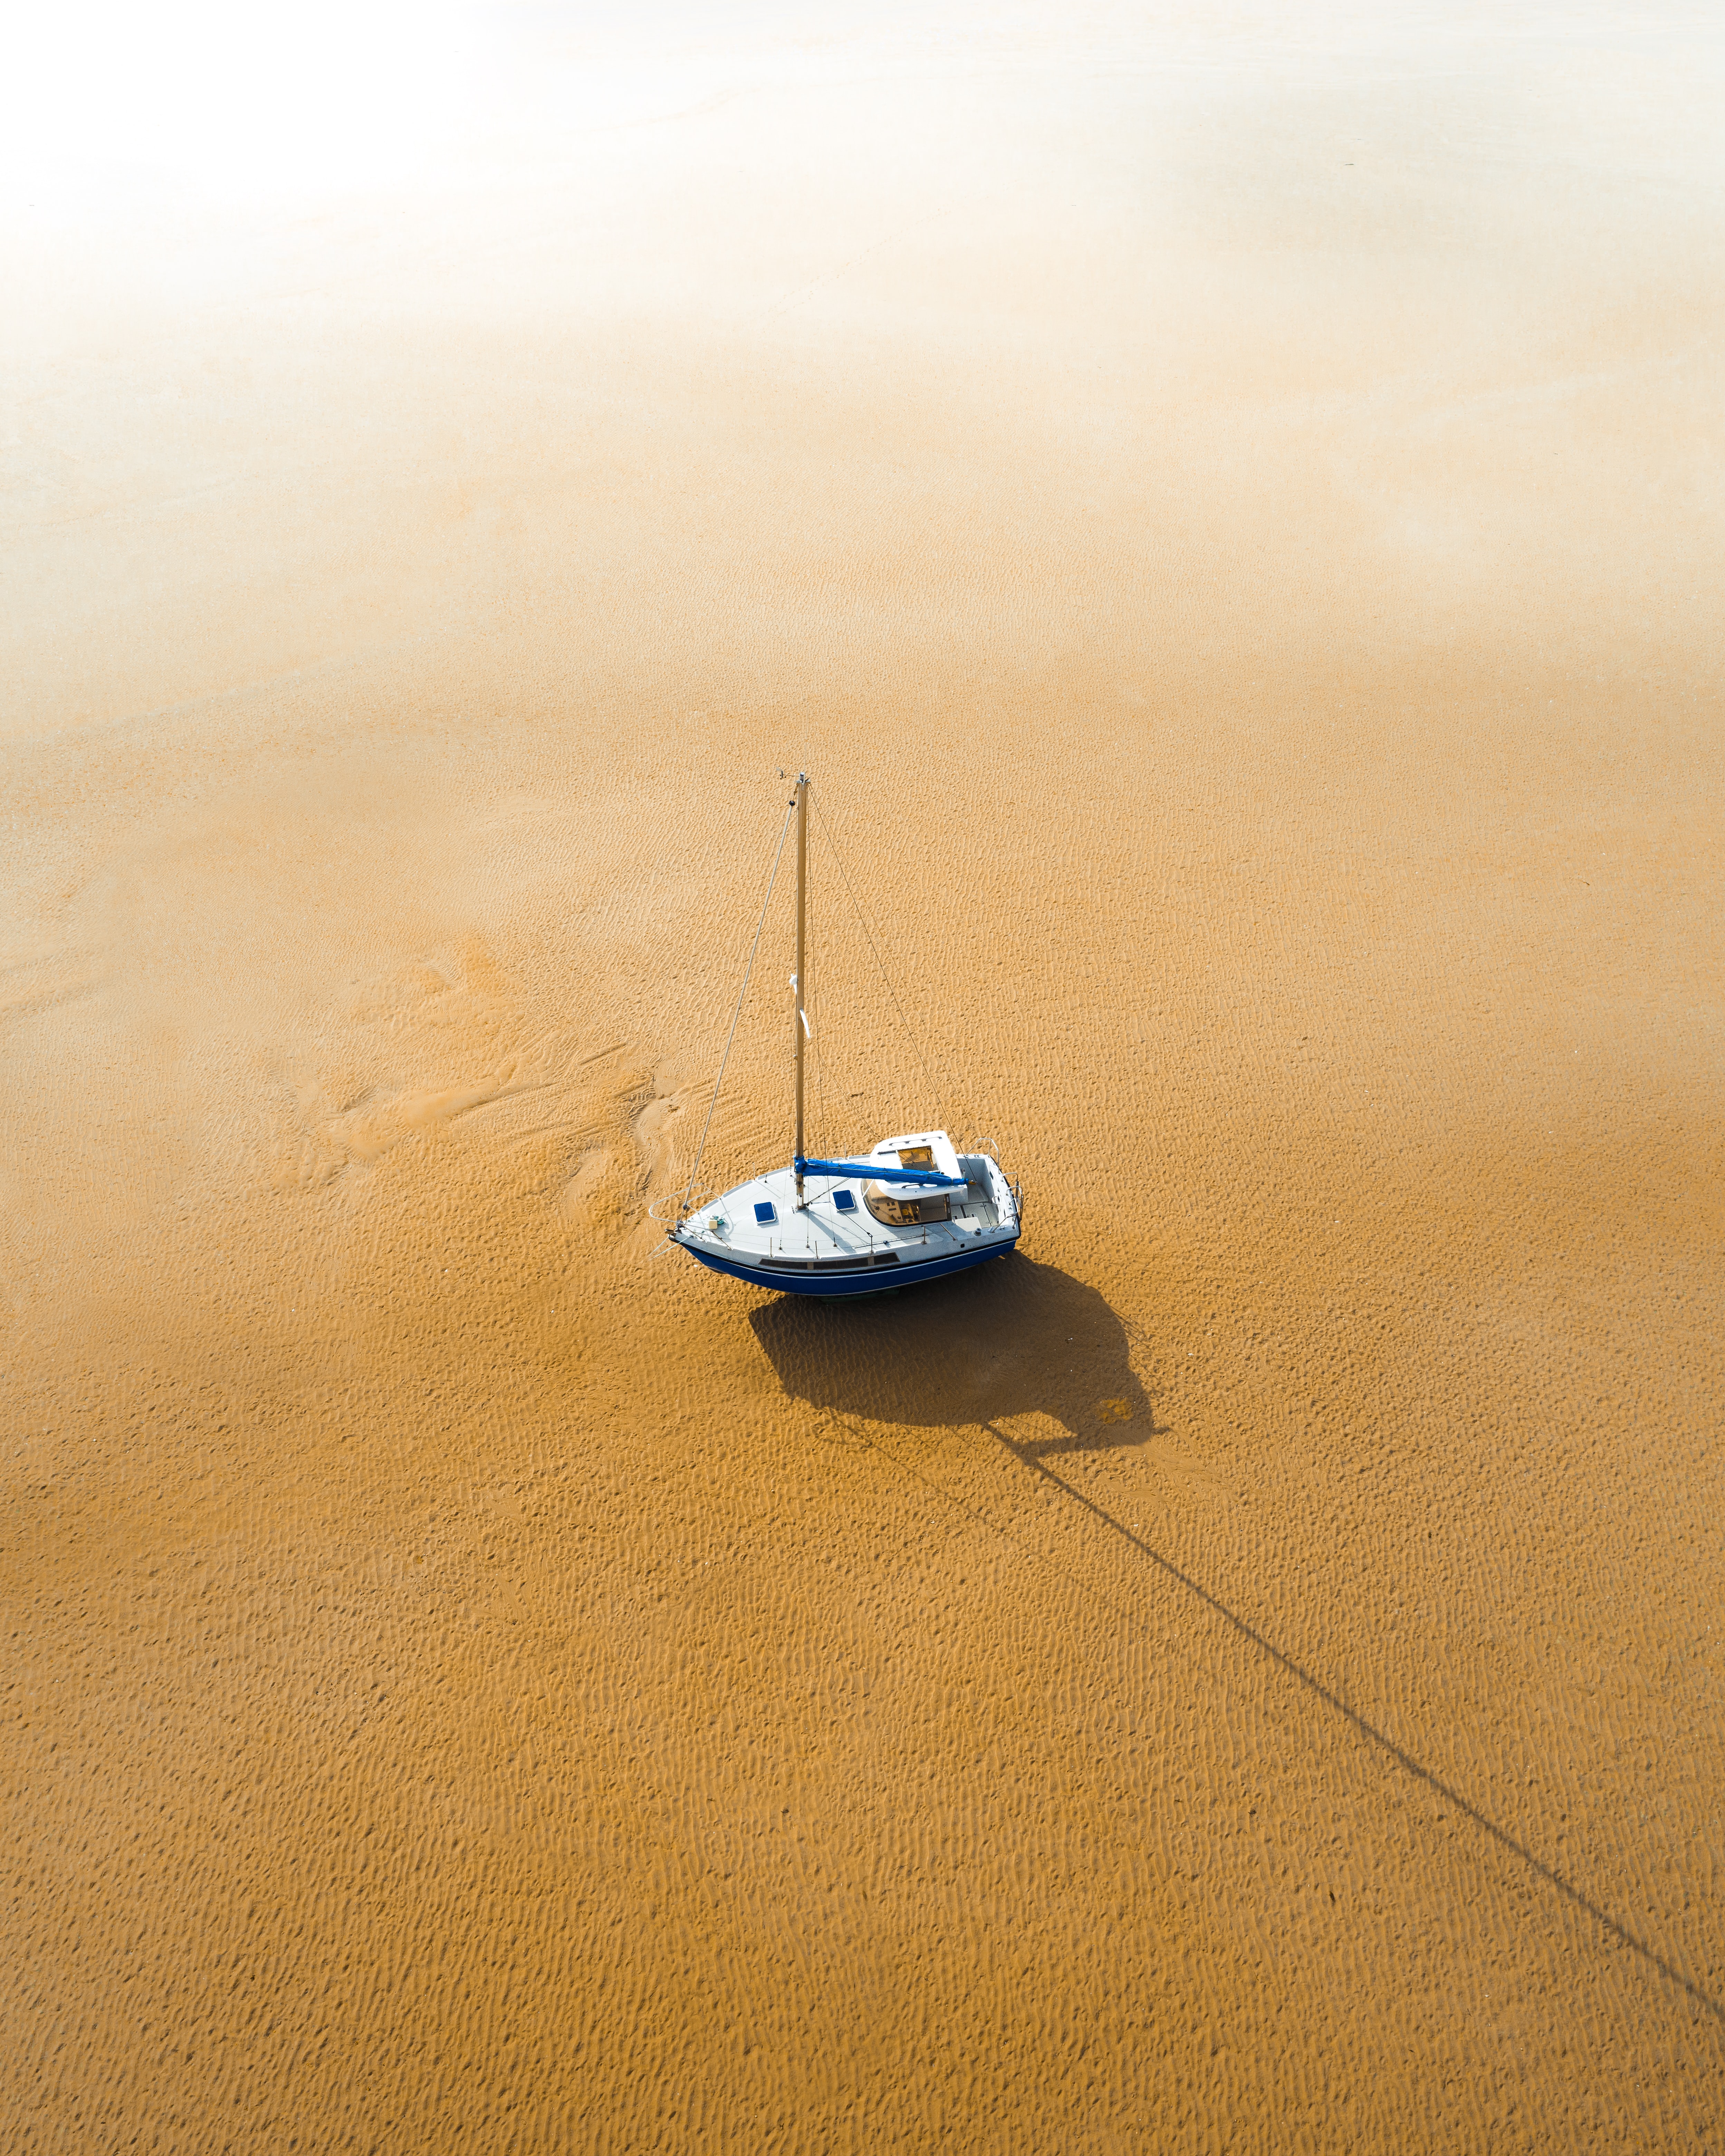 sailboat, sand, view from above, miscellanea, miscellaneous, boat, sailfish UHD